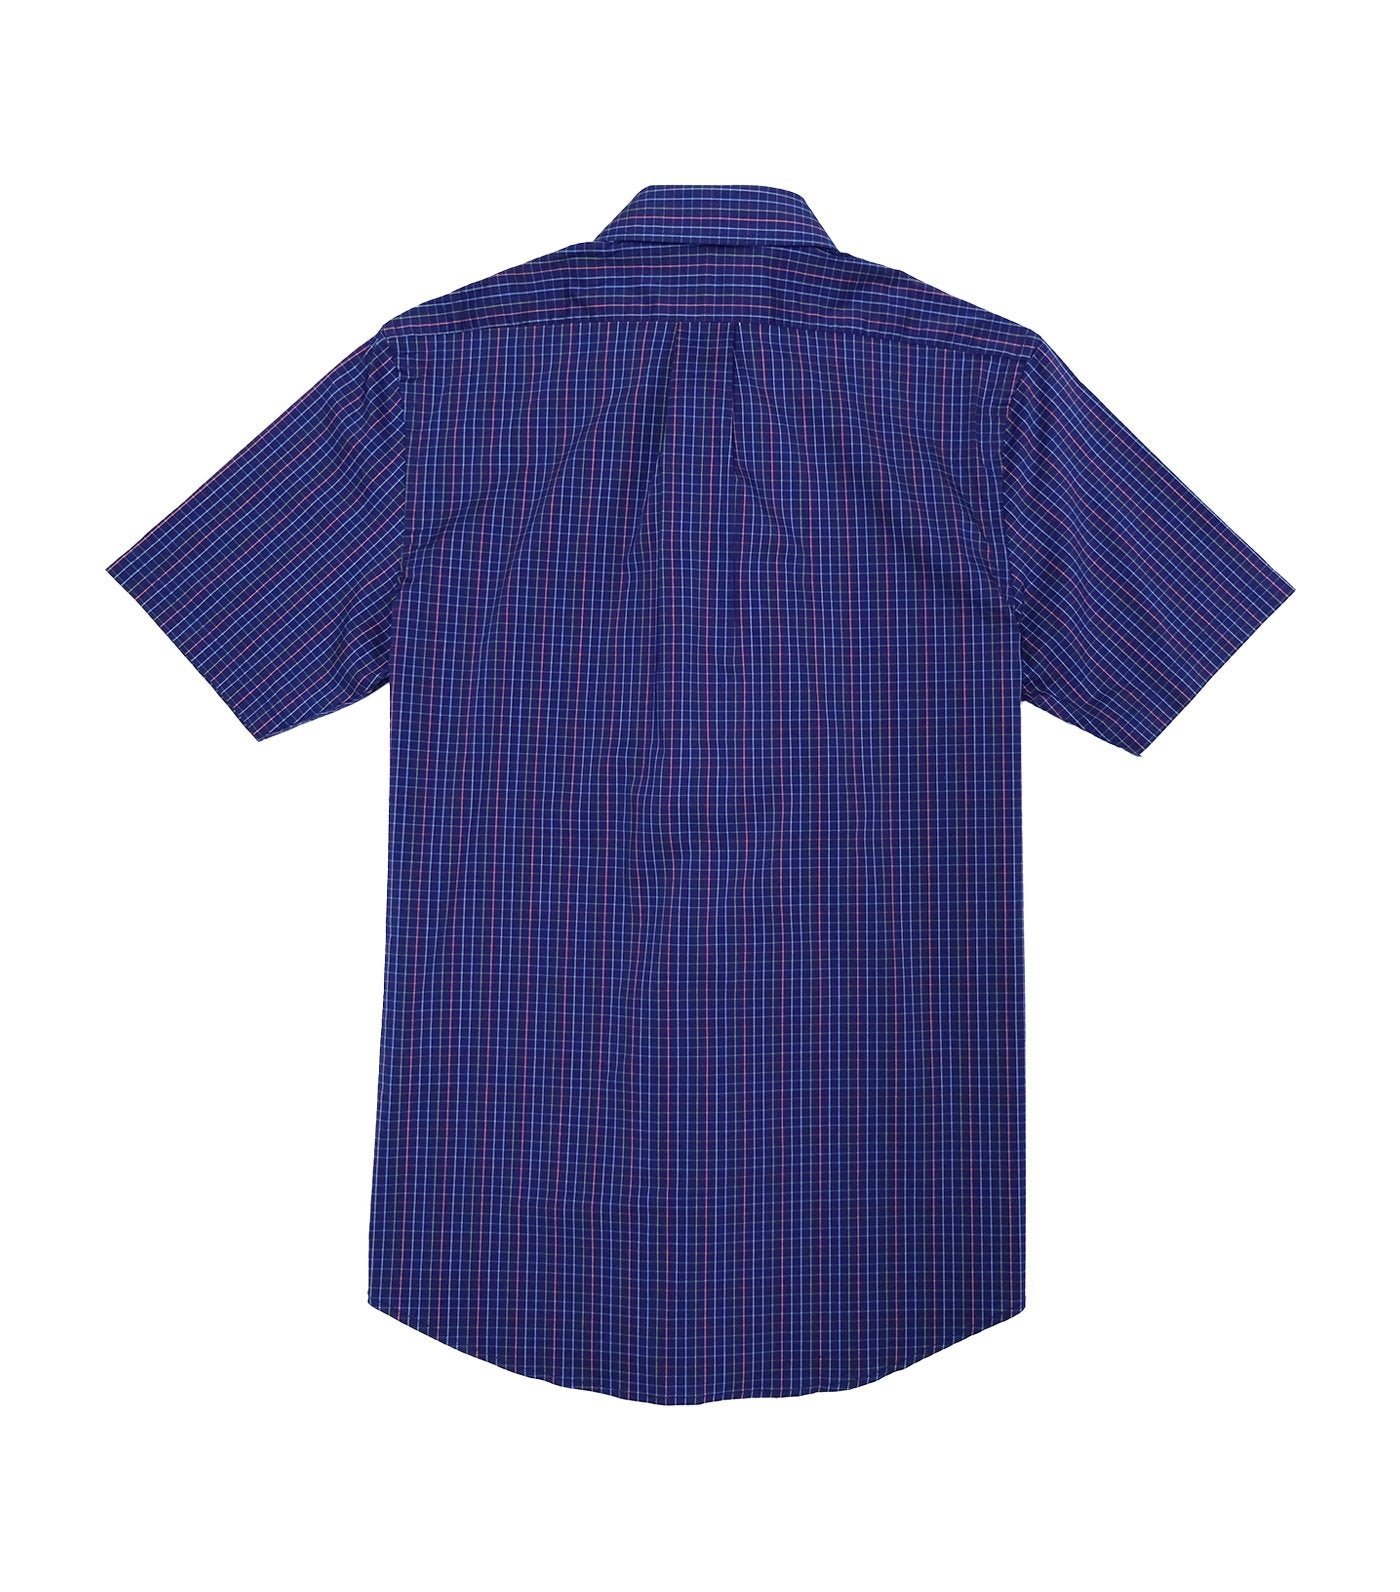 Jack Nicklaus Multi-Color Tattersal Woven Shirt